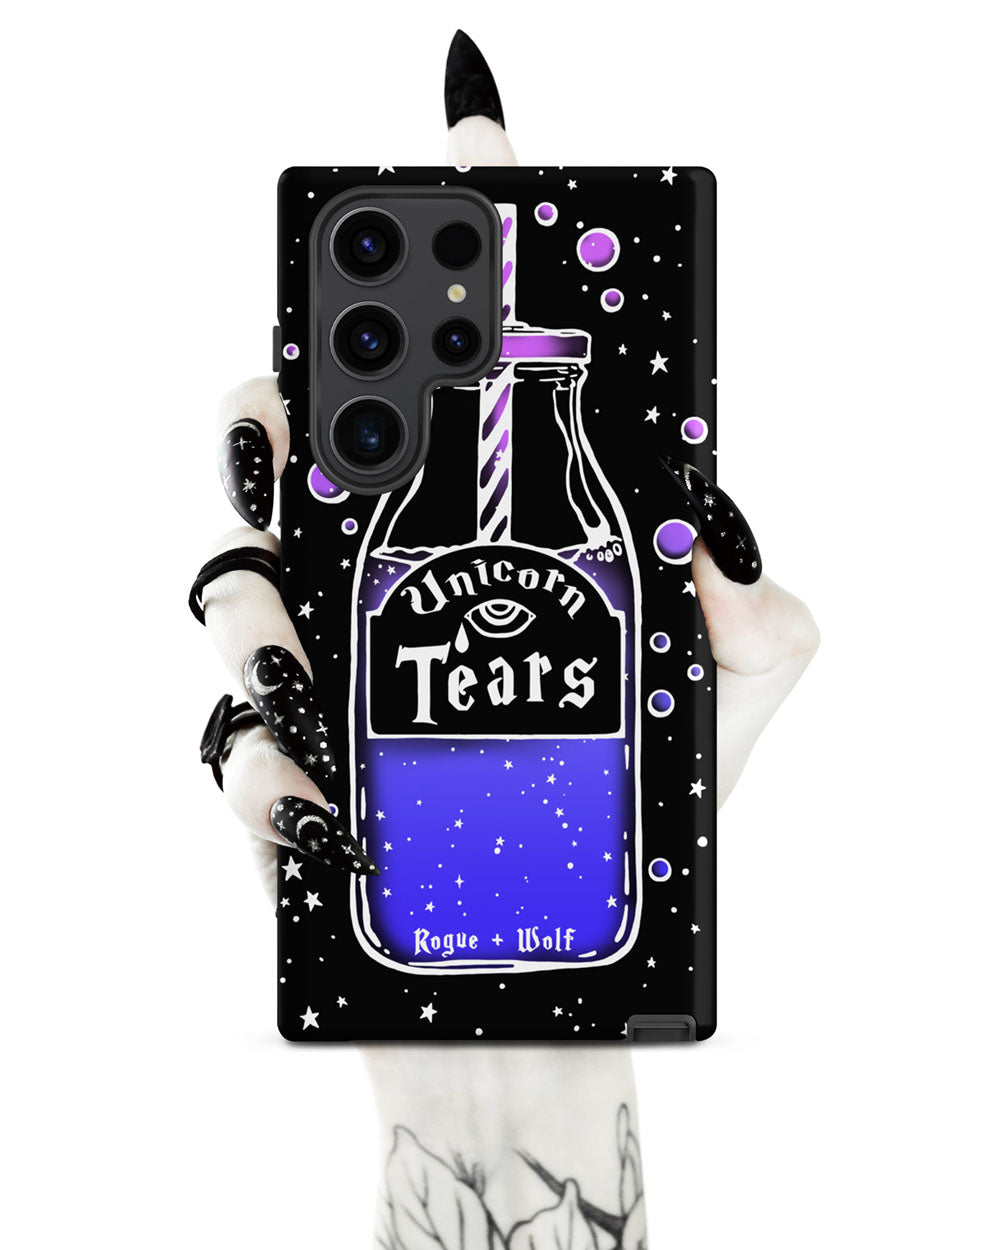 Unicorn Tears Tough Phone Case for Samsung - Witchy Goth Shockproof Anti-scratch Cover Gothic Phone Accessories